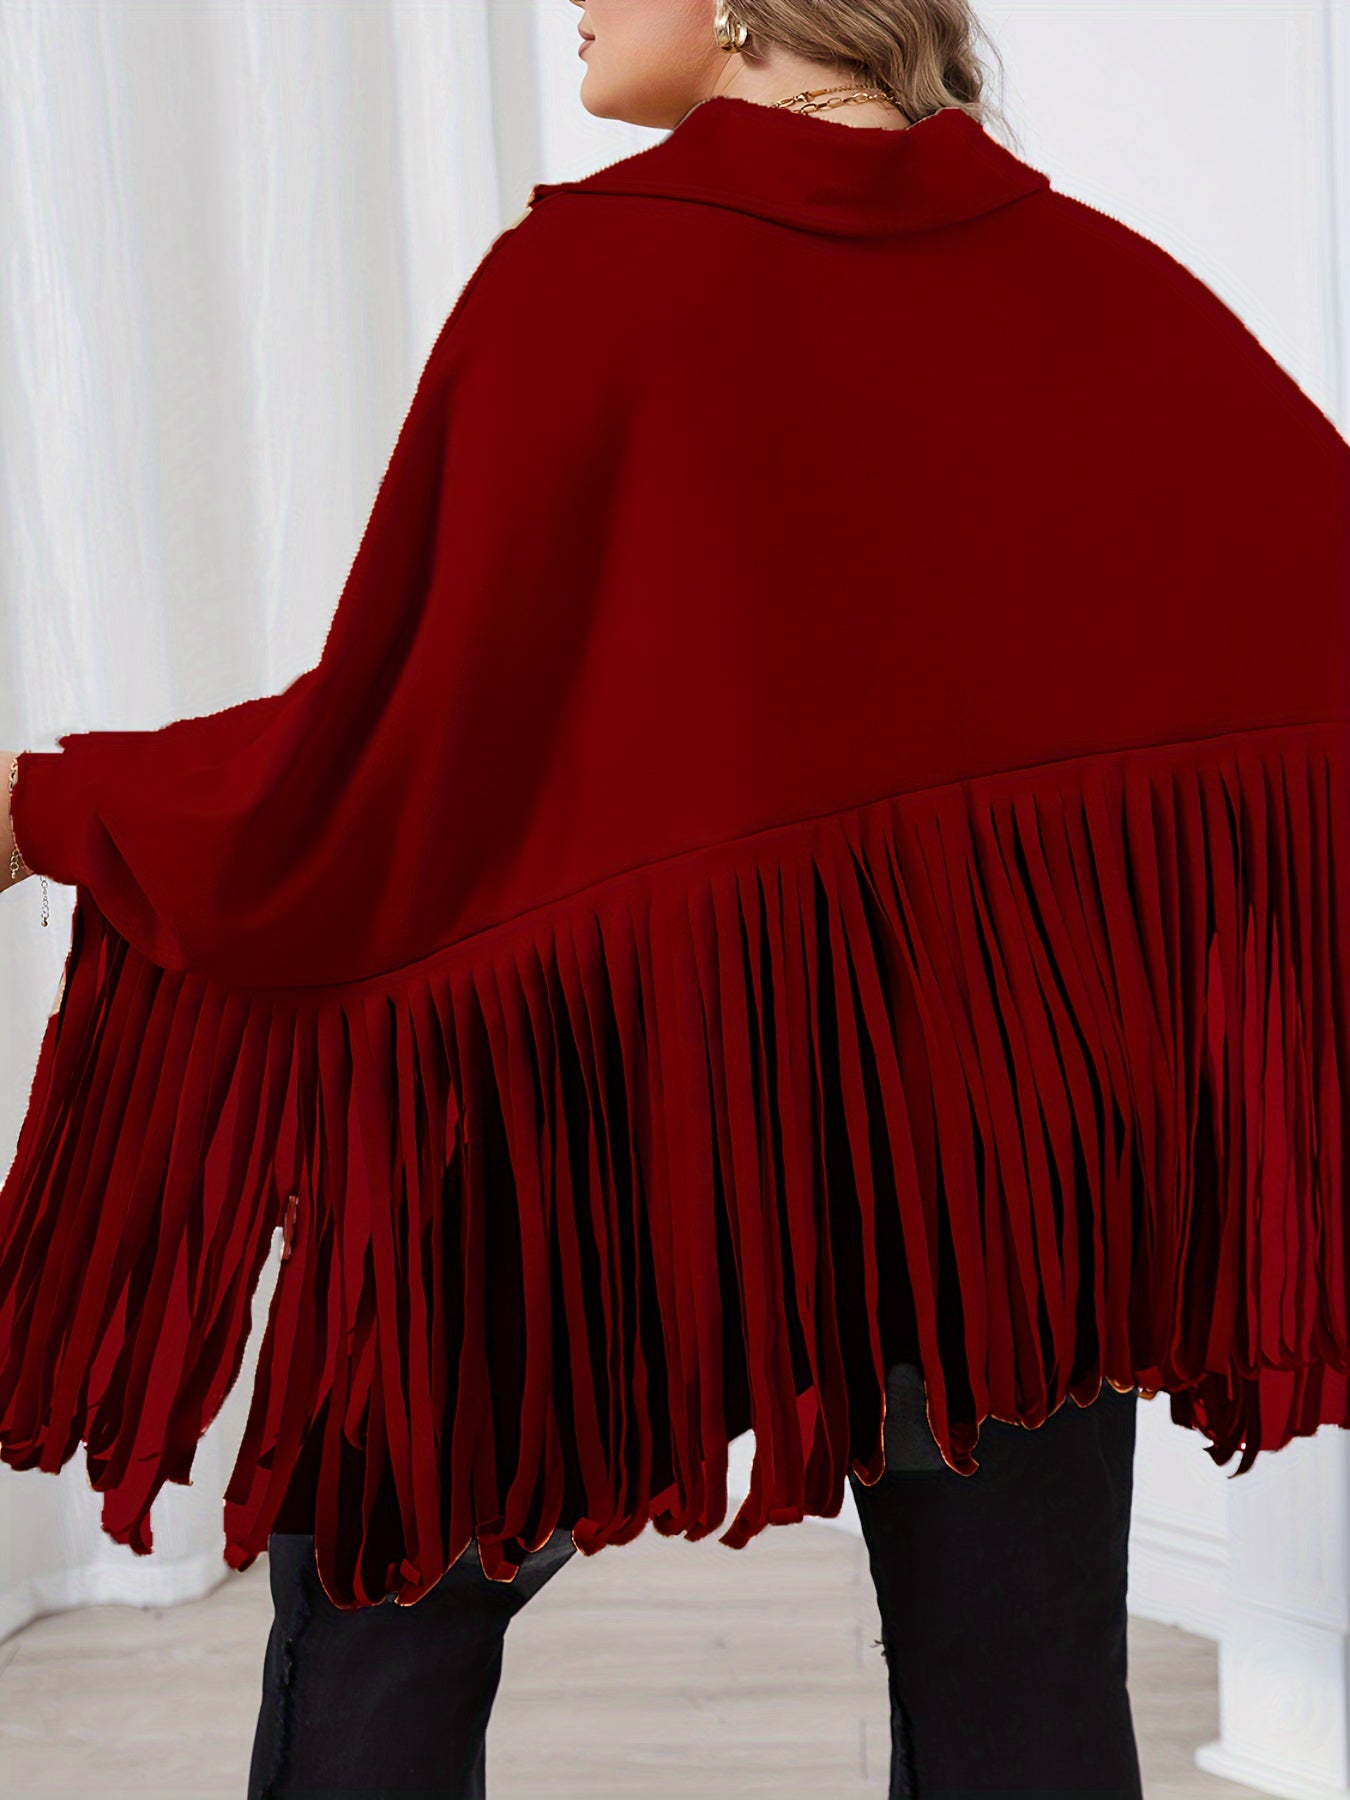 A person wearing a Maramalive™ Plus Size Trendy Top, Women's Plus Solid Batwing Sleeve Mock Neck Fringe Trim Cloak Top draped over their shoulders stands indoors with their back facing the camera.